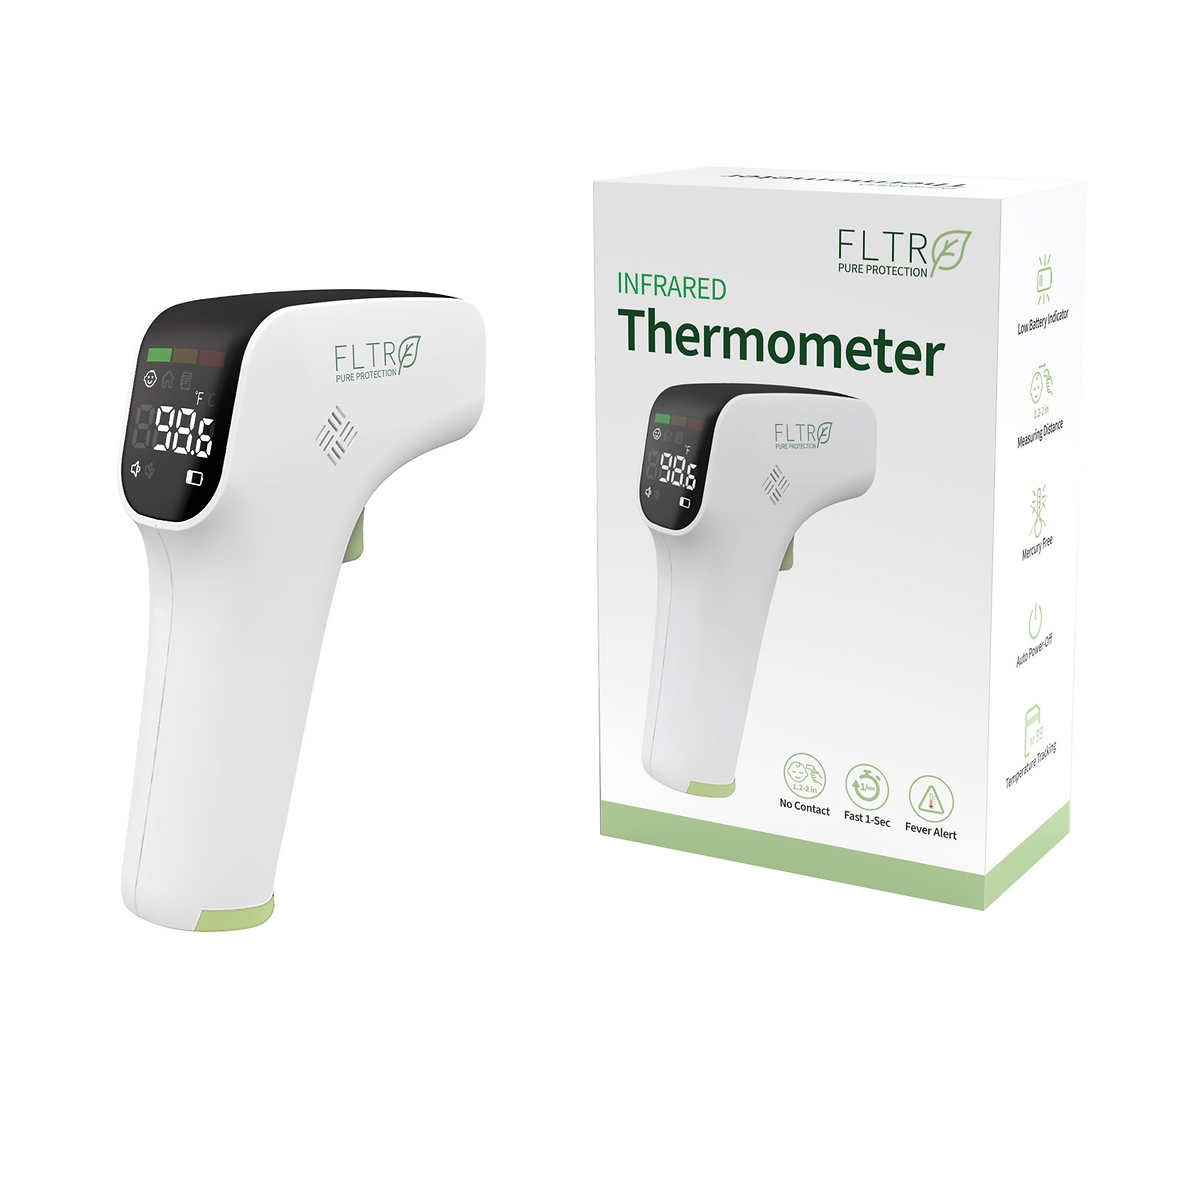 FLTR Non-Contact Infrared Thermometer体温计